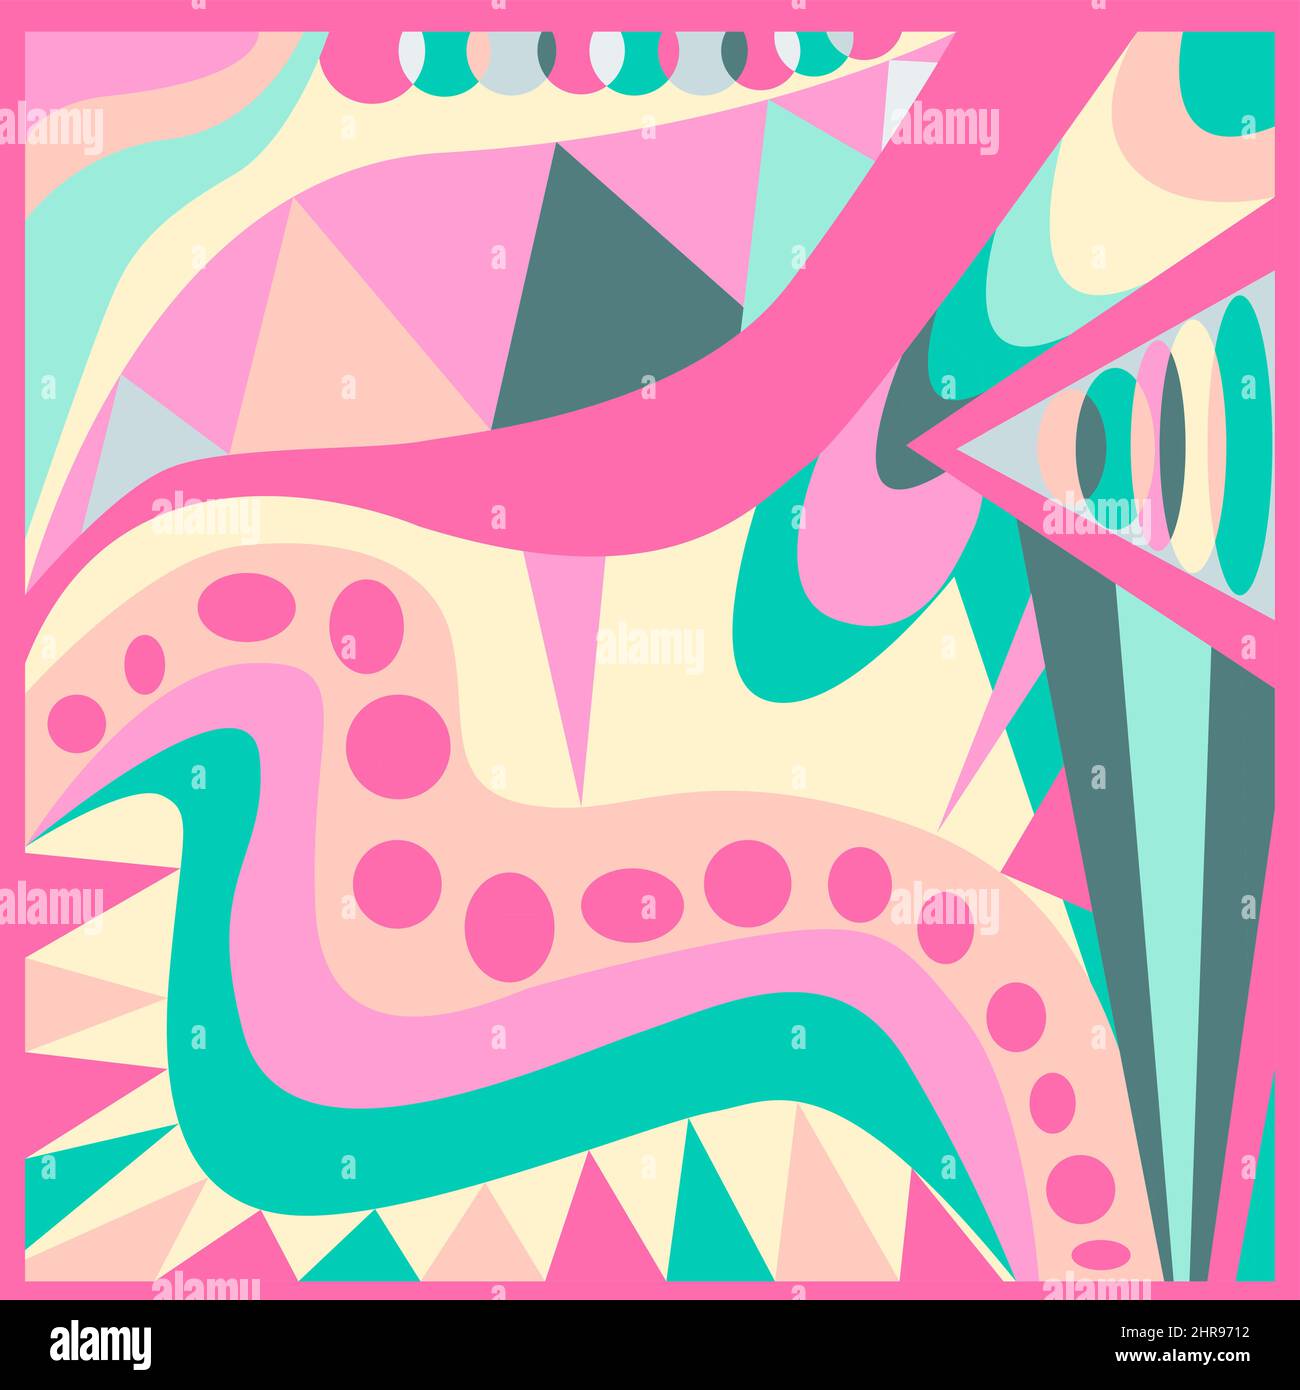 191 Emilio Pucci Pattern Images, Stock Photos, 3D objects